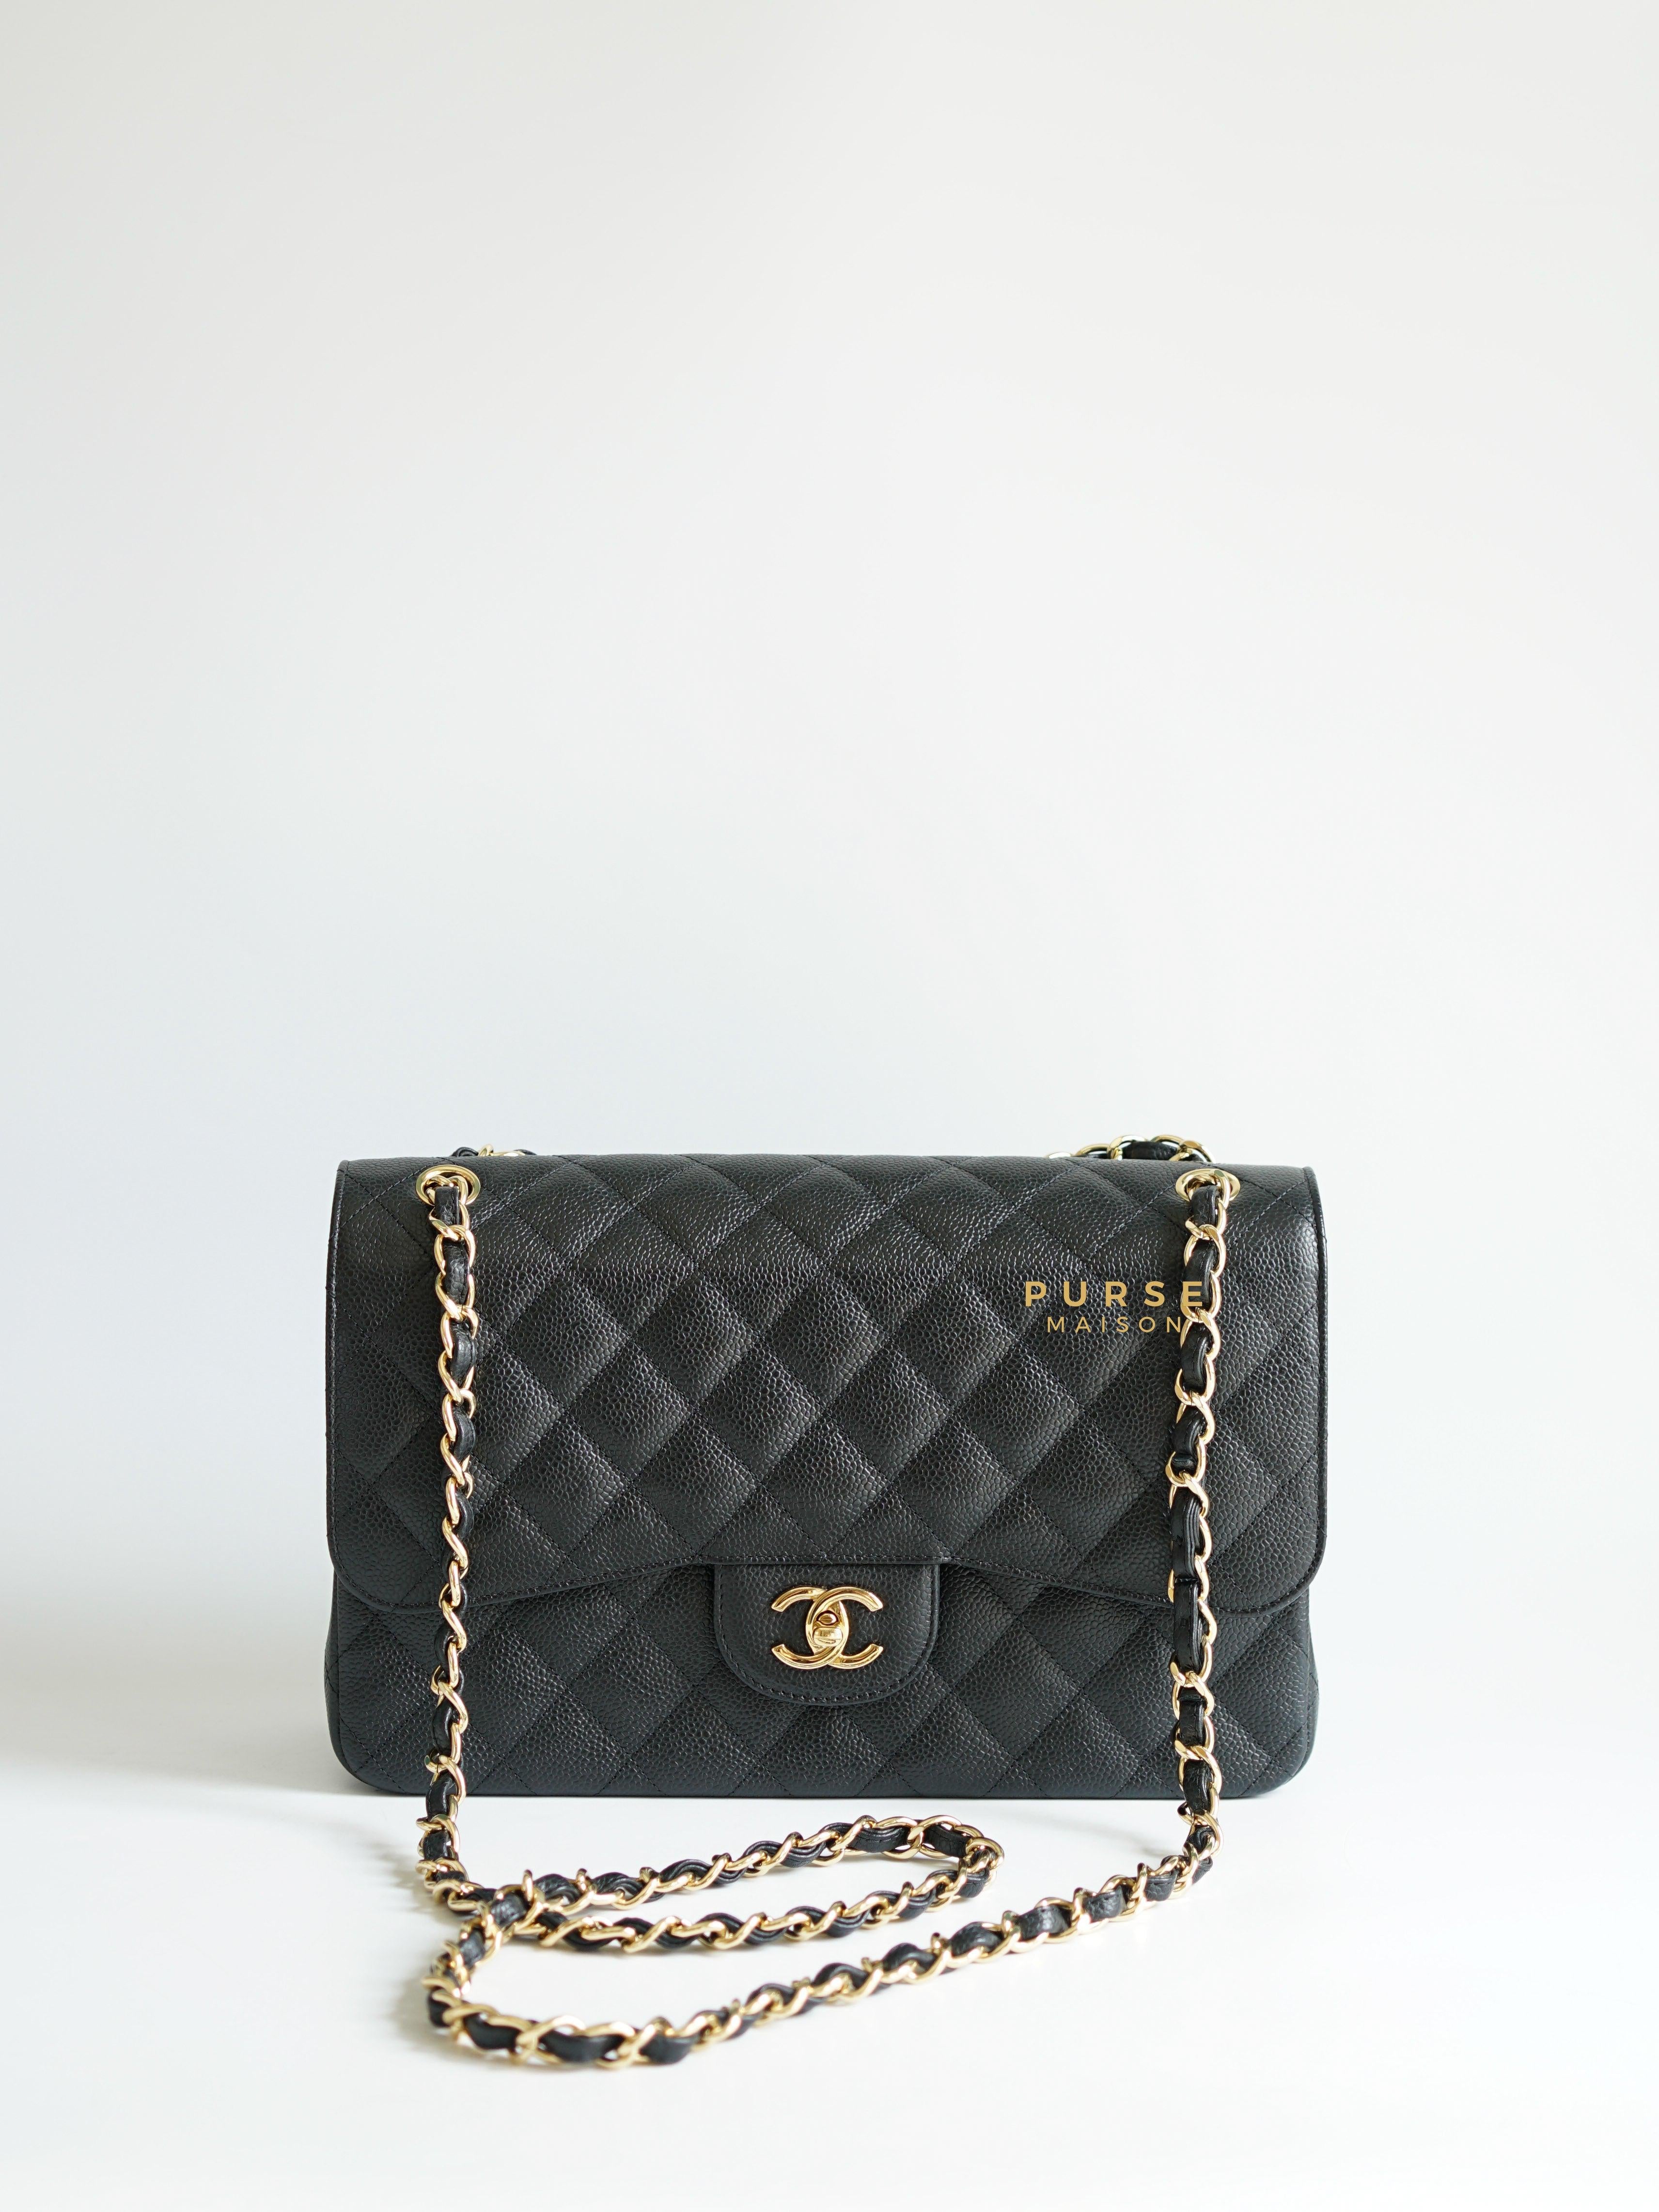 Chanel Classic Double Flap Jumbo Black Caviar Leather and Gold Hardware Series 17 | Purse Maison Luxury Bags Shop